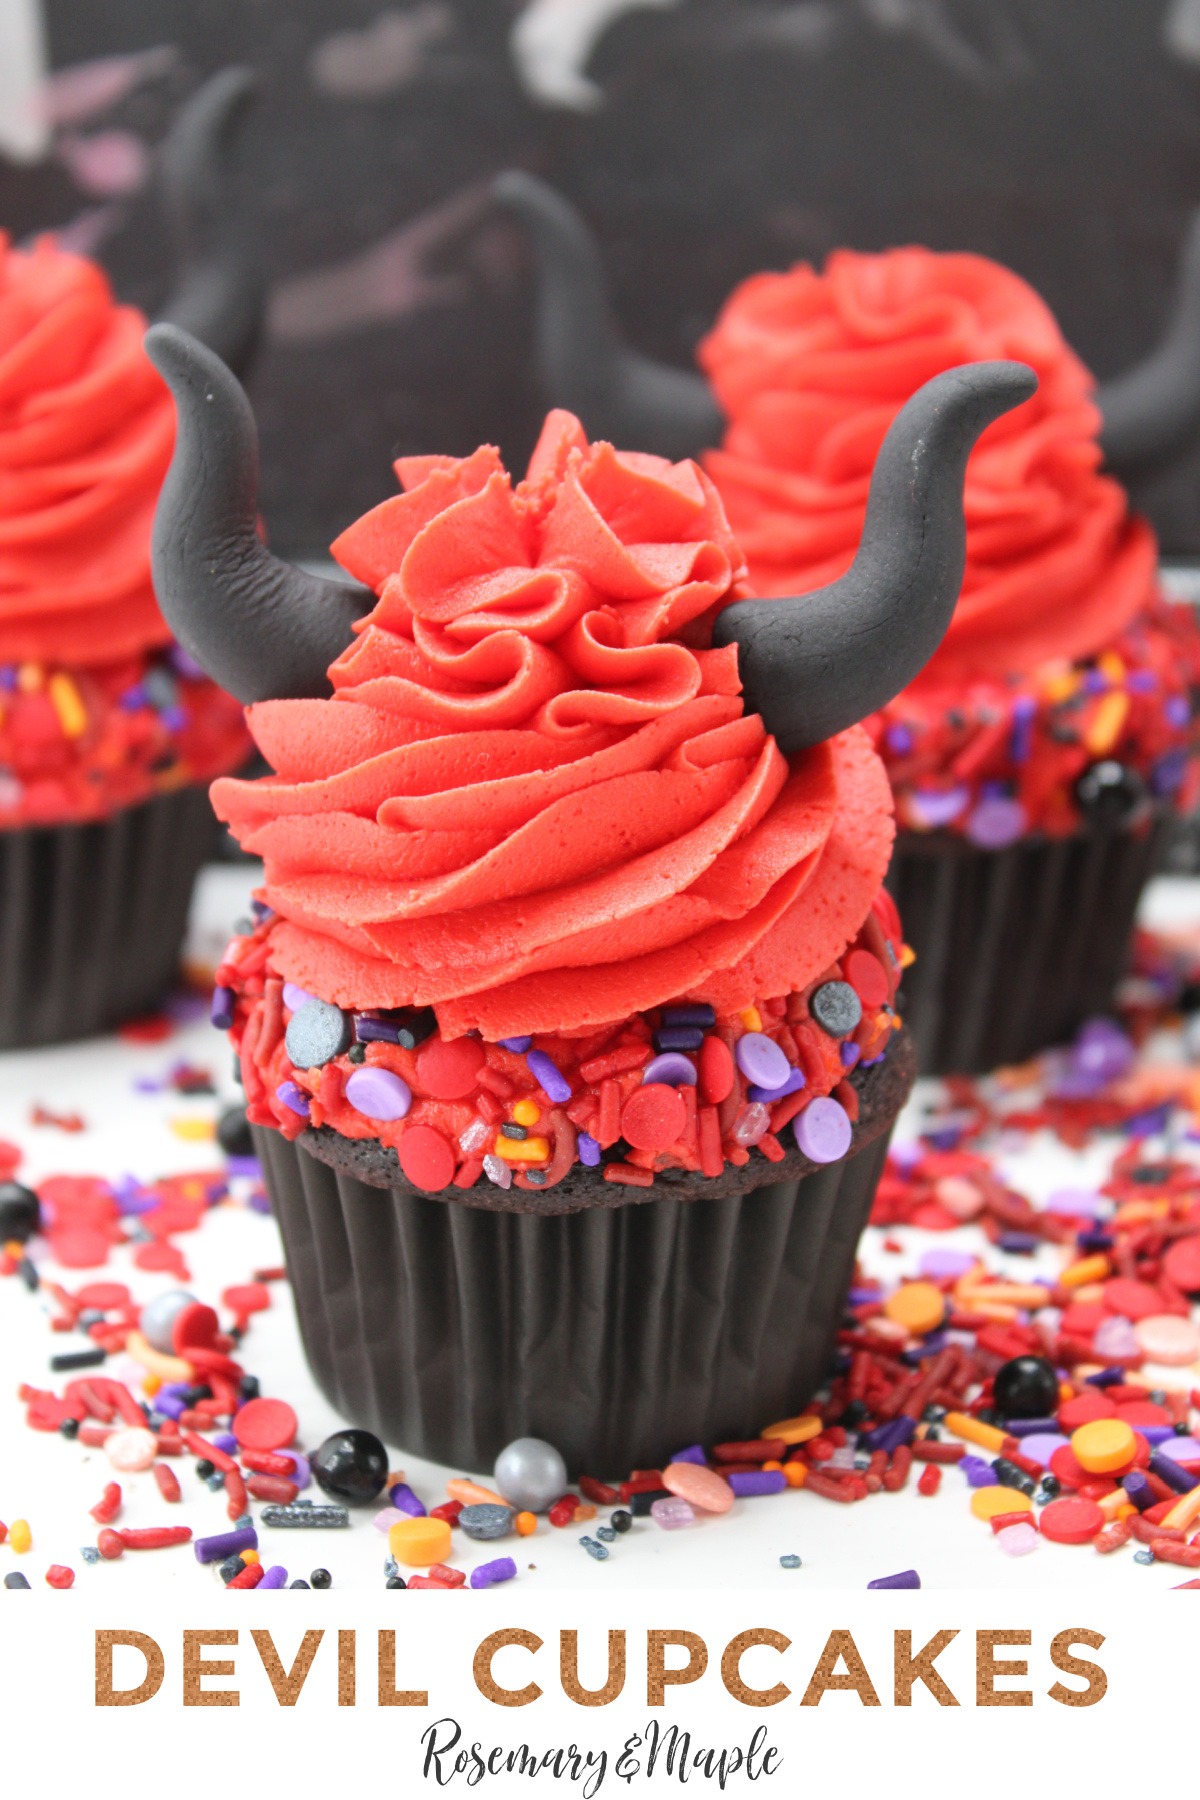 This Halloween cupcake decorating tutorial will show you how to make devil horns for your own devil cupcakes. It's easy, fun and delicious!